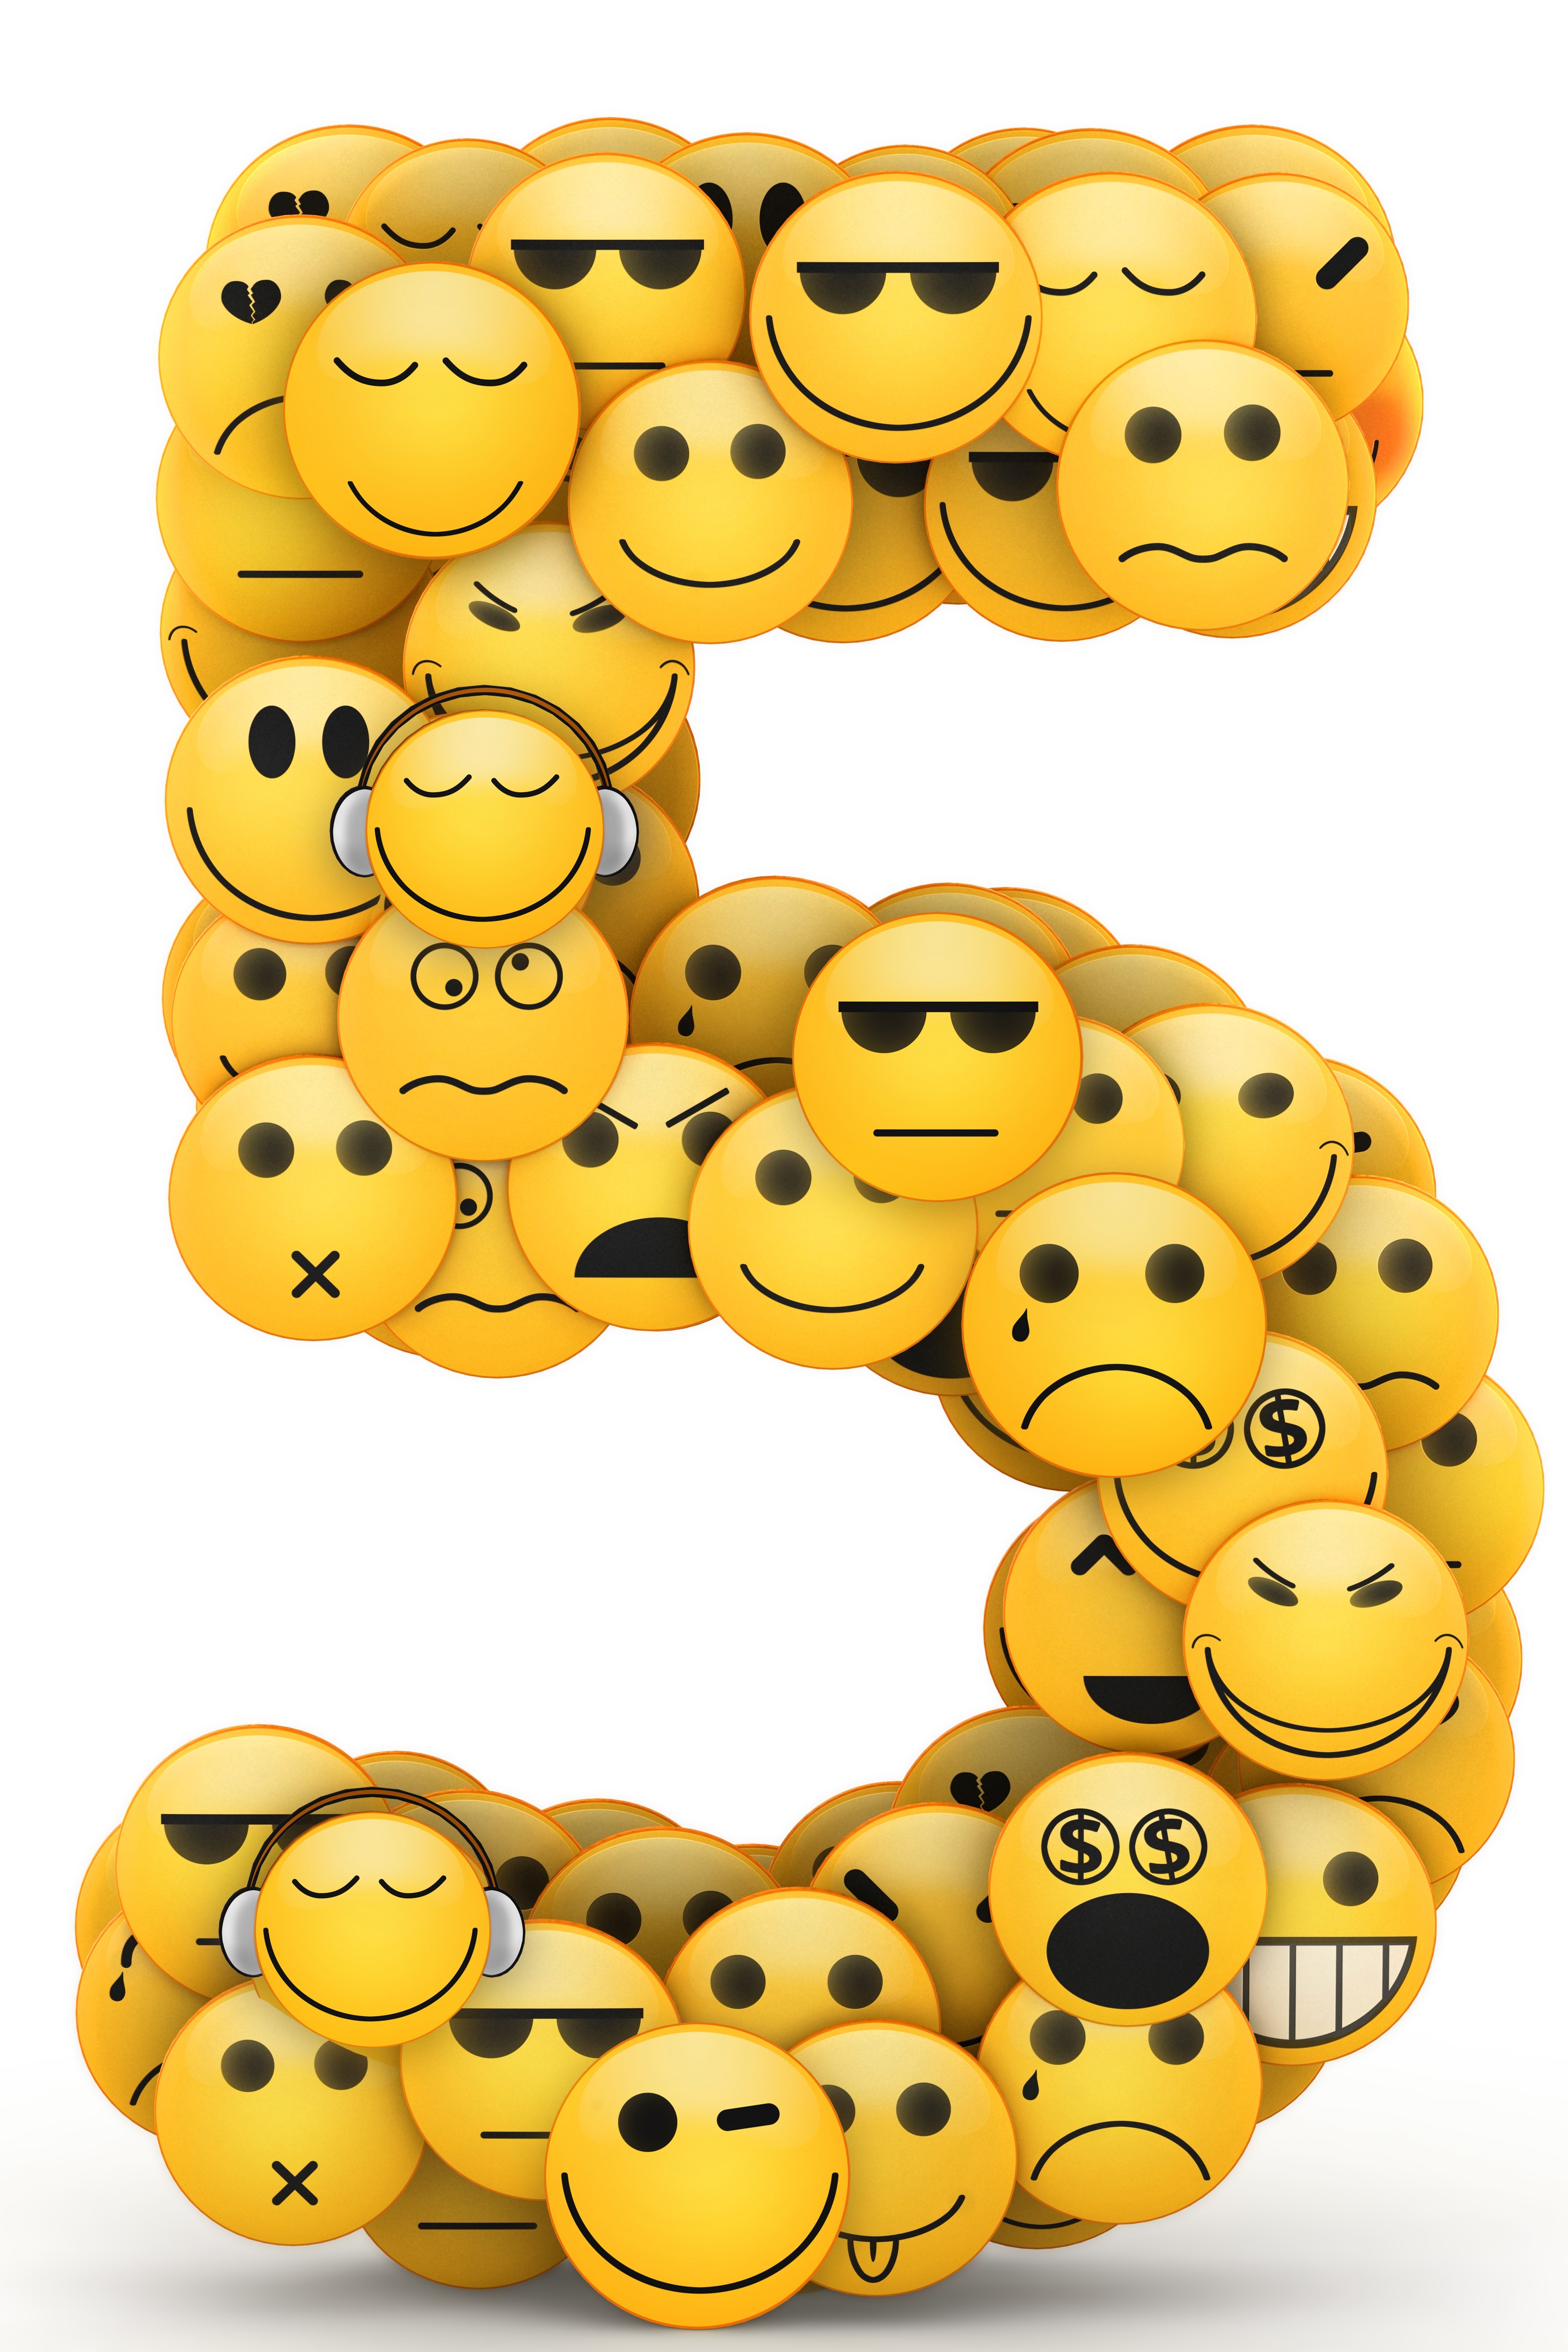 Happy, sad, etc. faces filling the shape of number 5